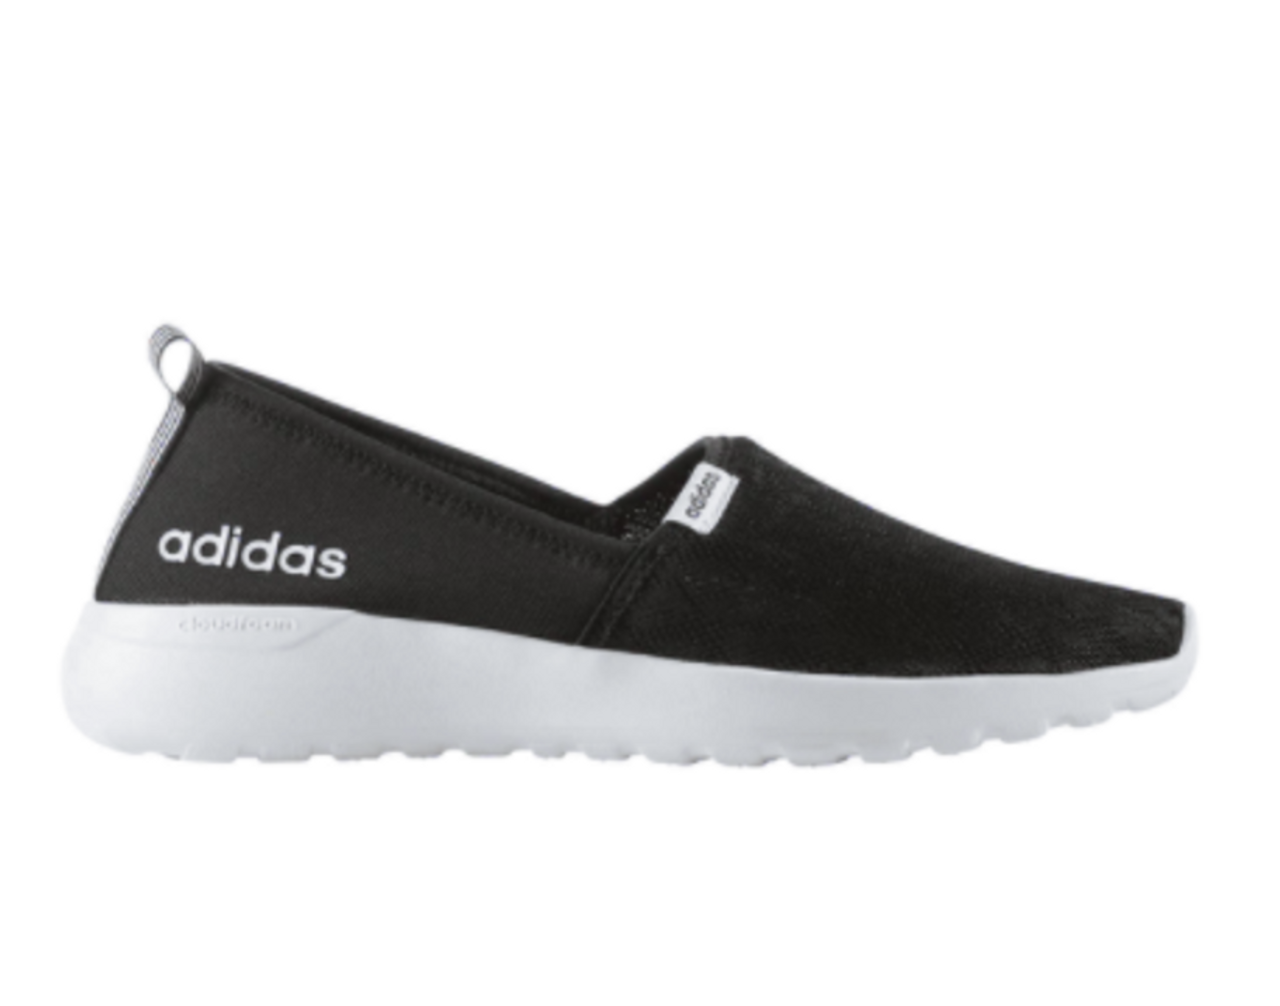 adidas pull on shoes